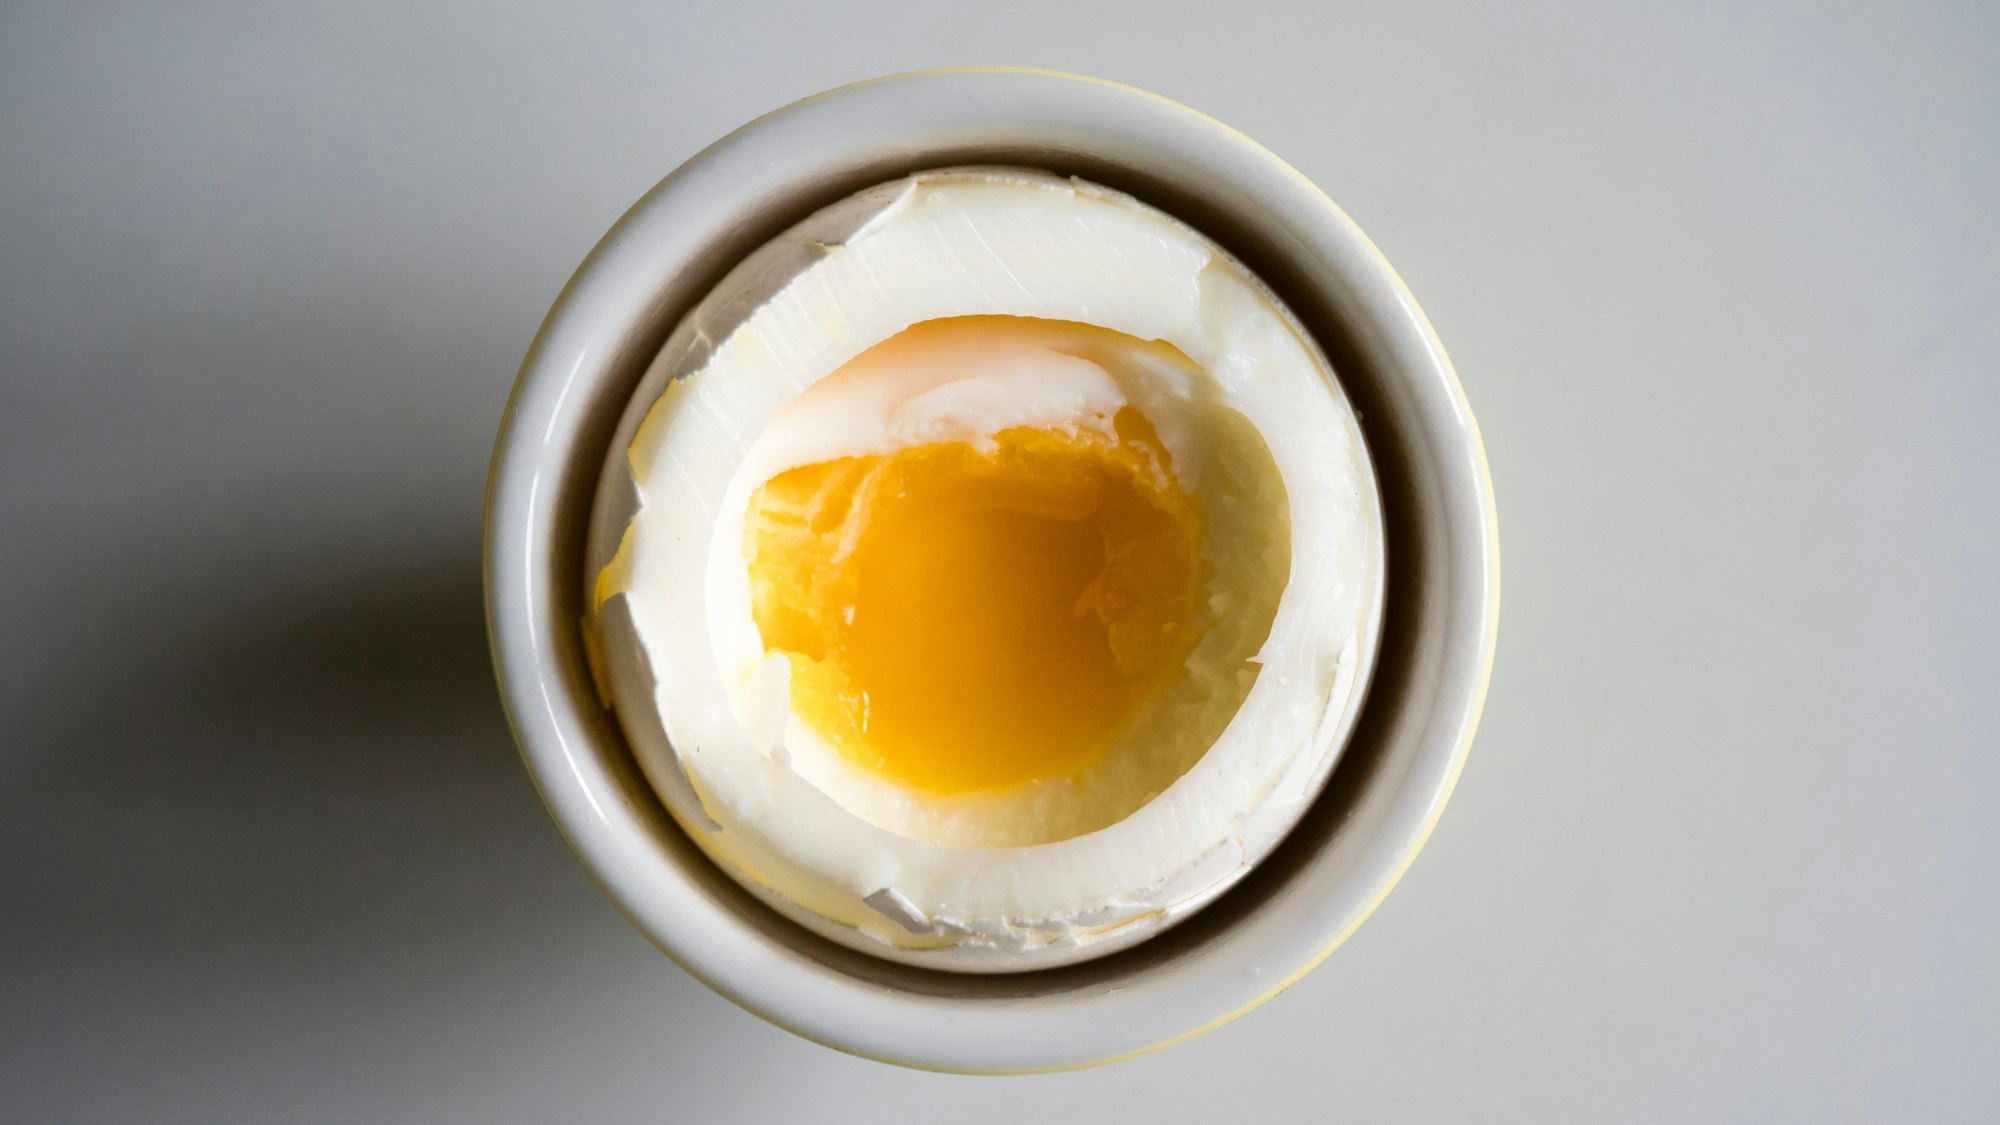 Soft boiled breakfast egg on a white porcelain plate
EThamPhoto/ Getty Images